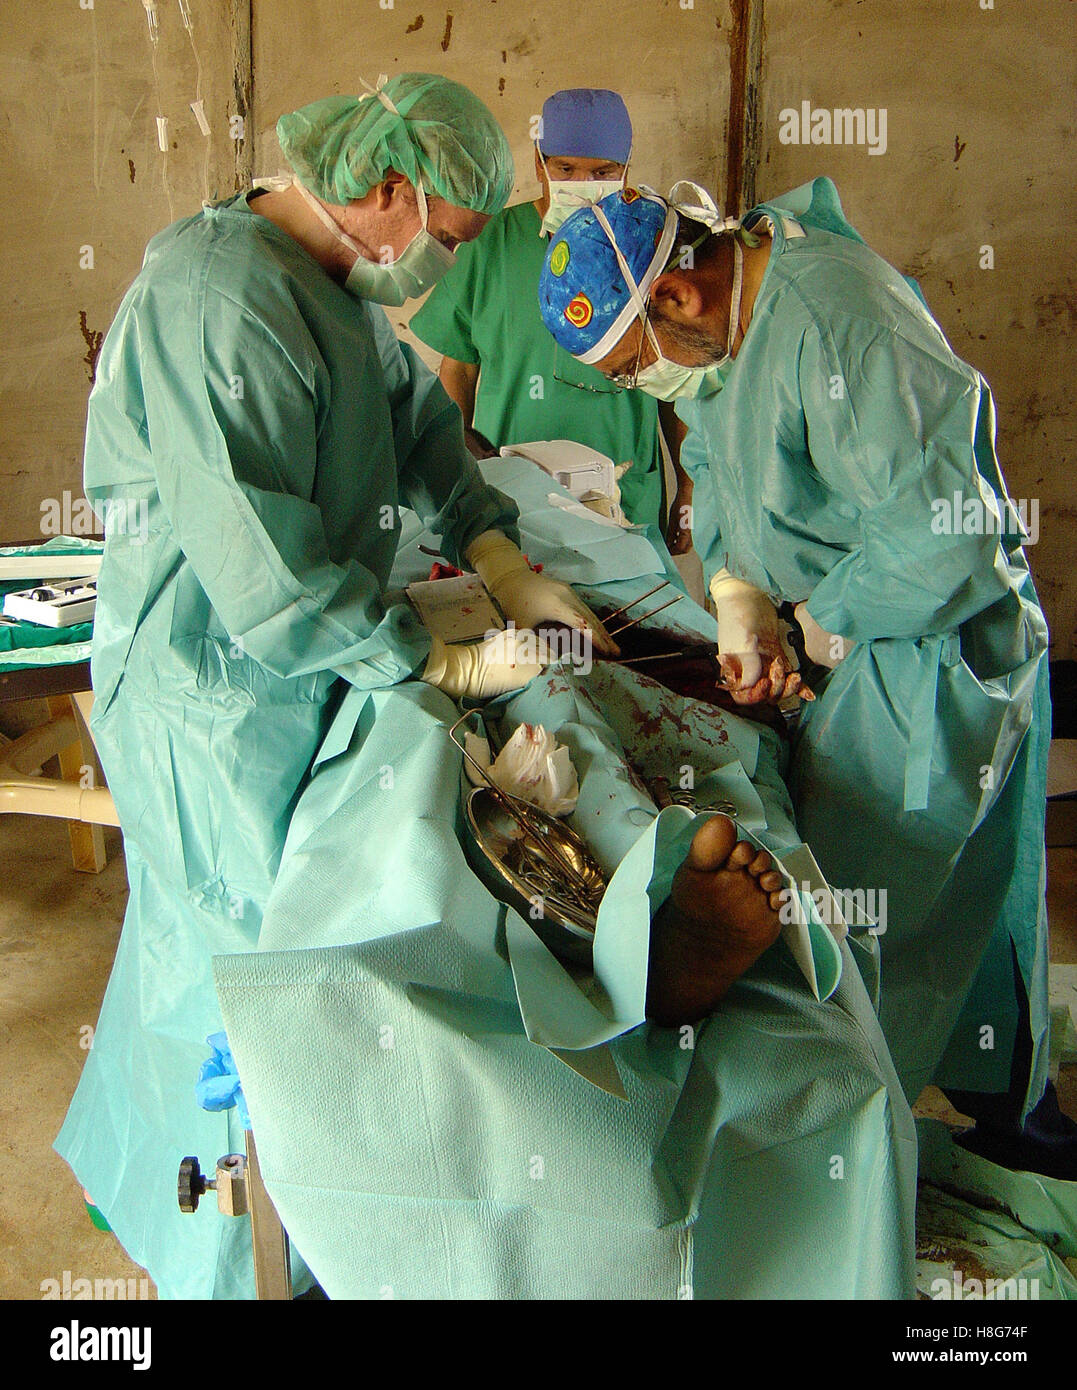 31st August 2005 An ICRC Field Surgical Team perform surgery on an SLA soldier in a guard's hut in northern Darfur, Sudan. Stock Photo